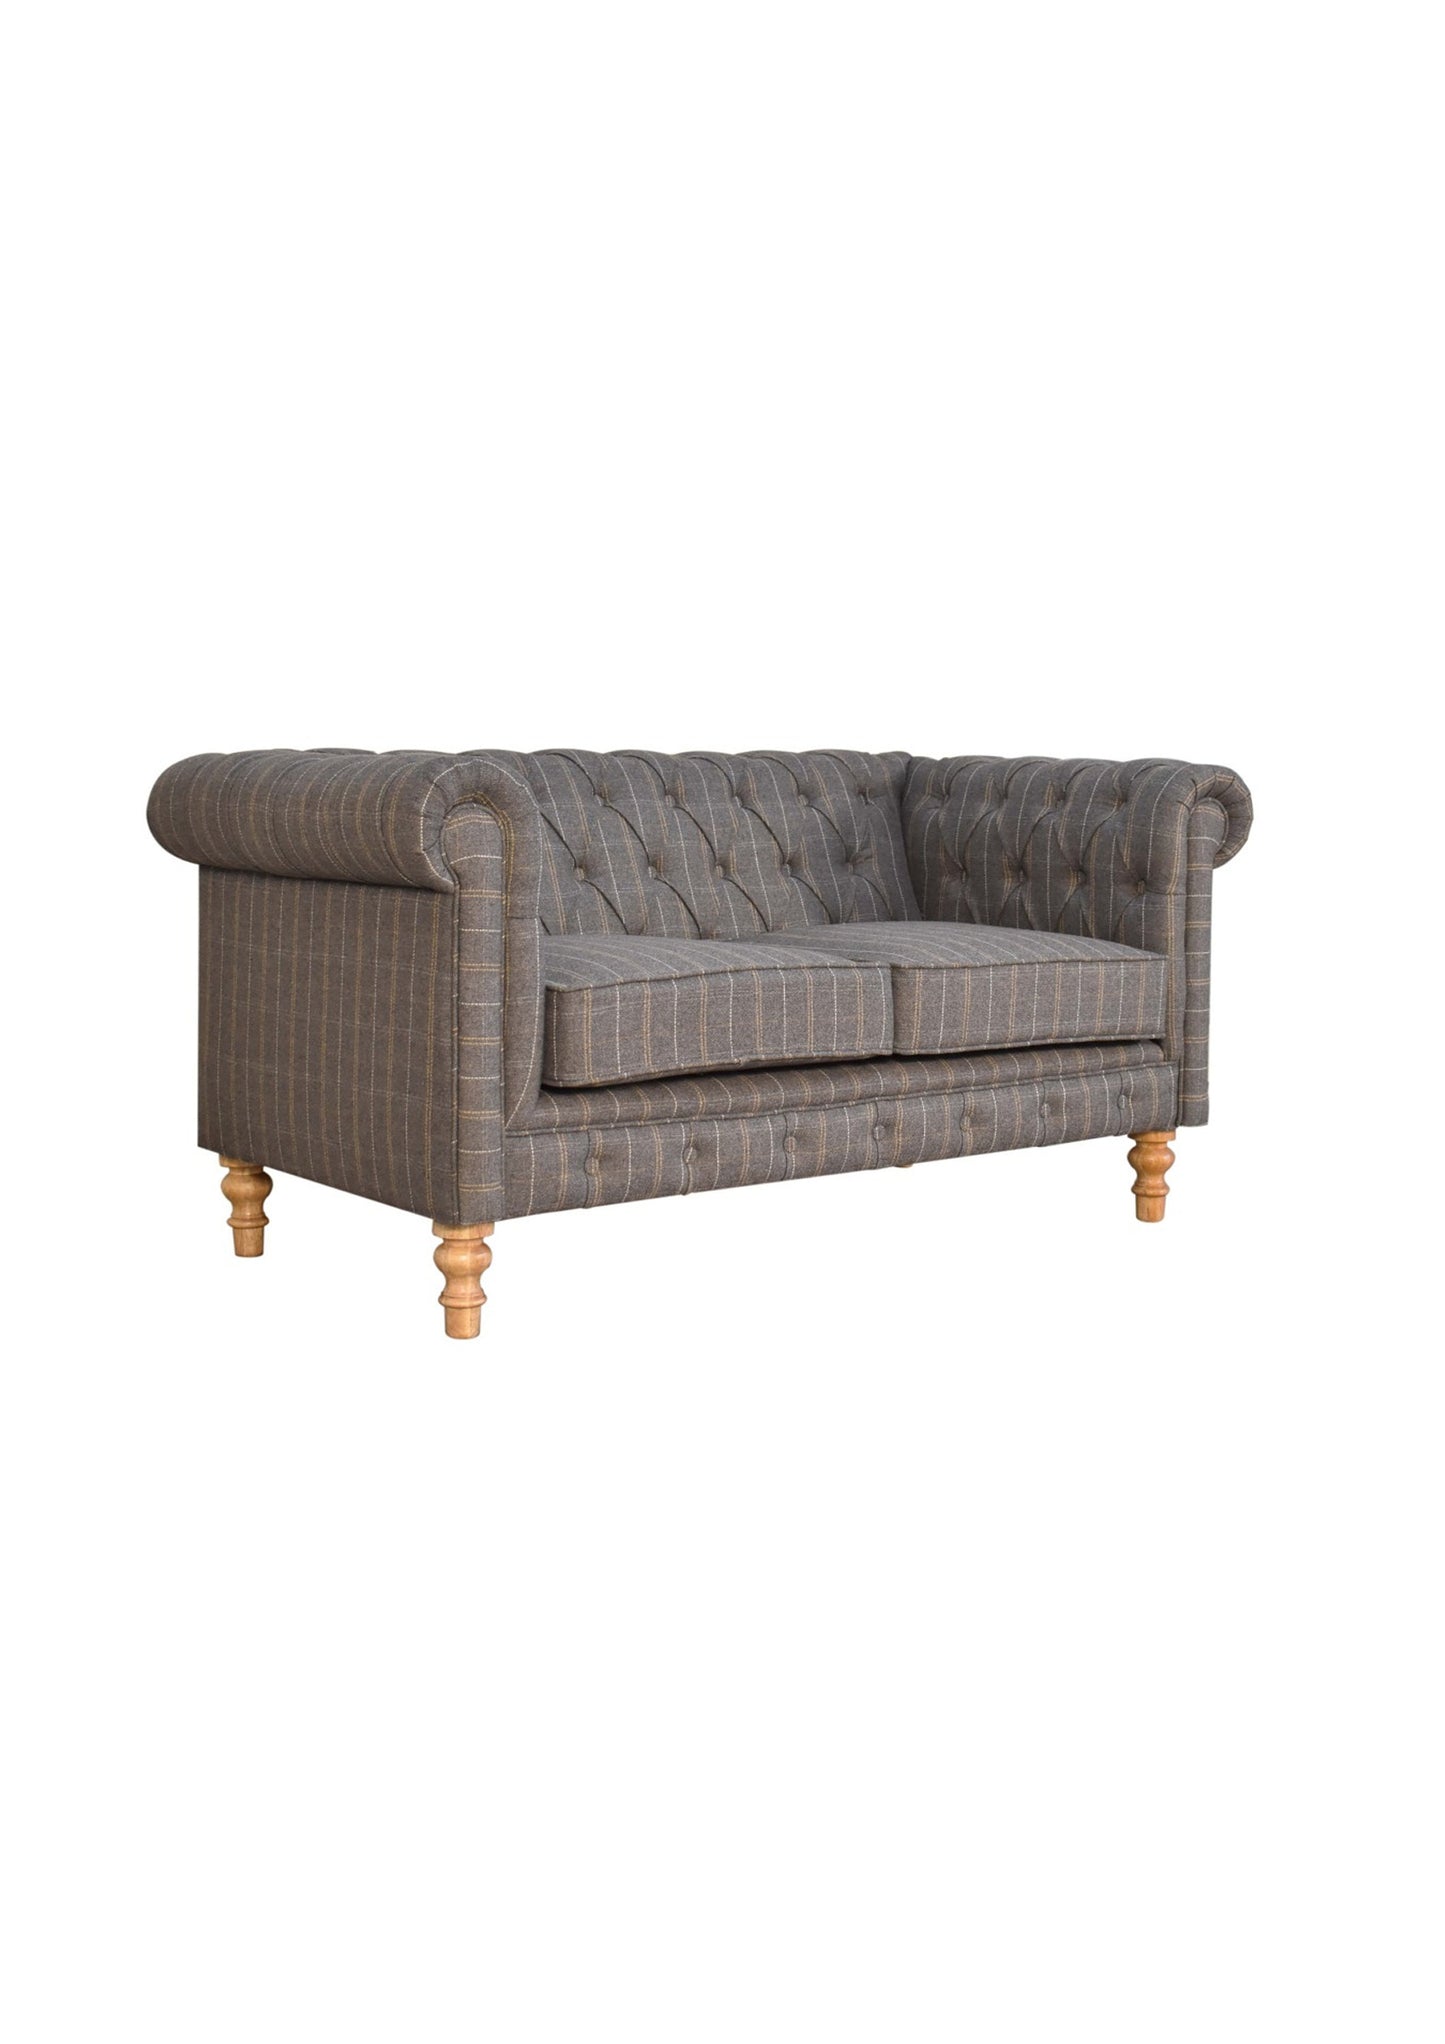 Pewter and Yellow Tweed Chesterfield 2 Seater 150cm wide Sofa Loveset for Bedroom Livingroom Country Style